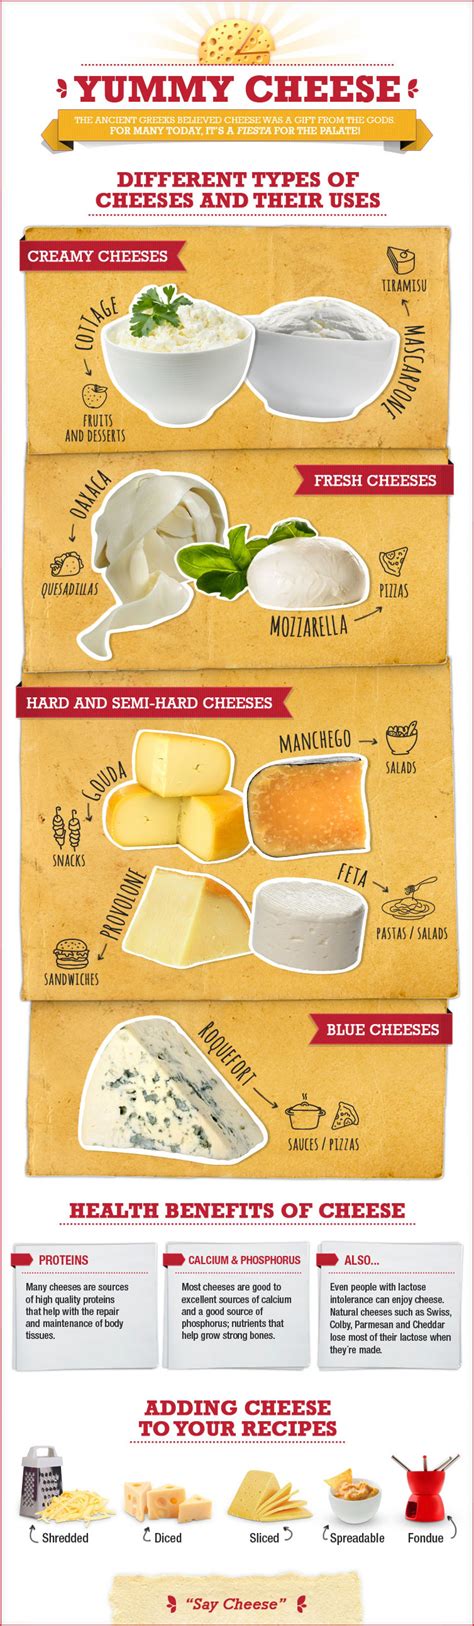 A Cheese Course: The Basic Types and Uses of Cheese ...